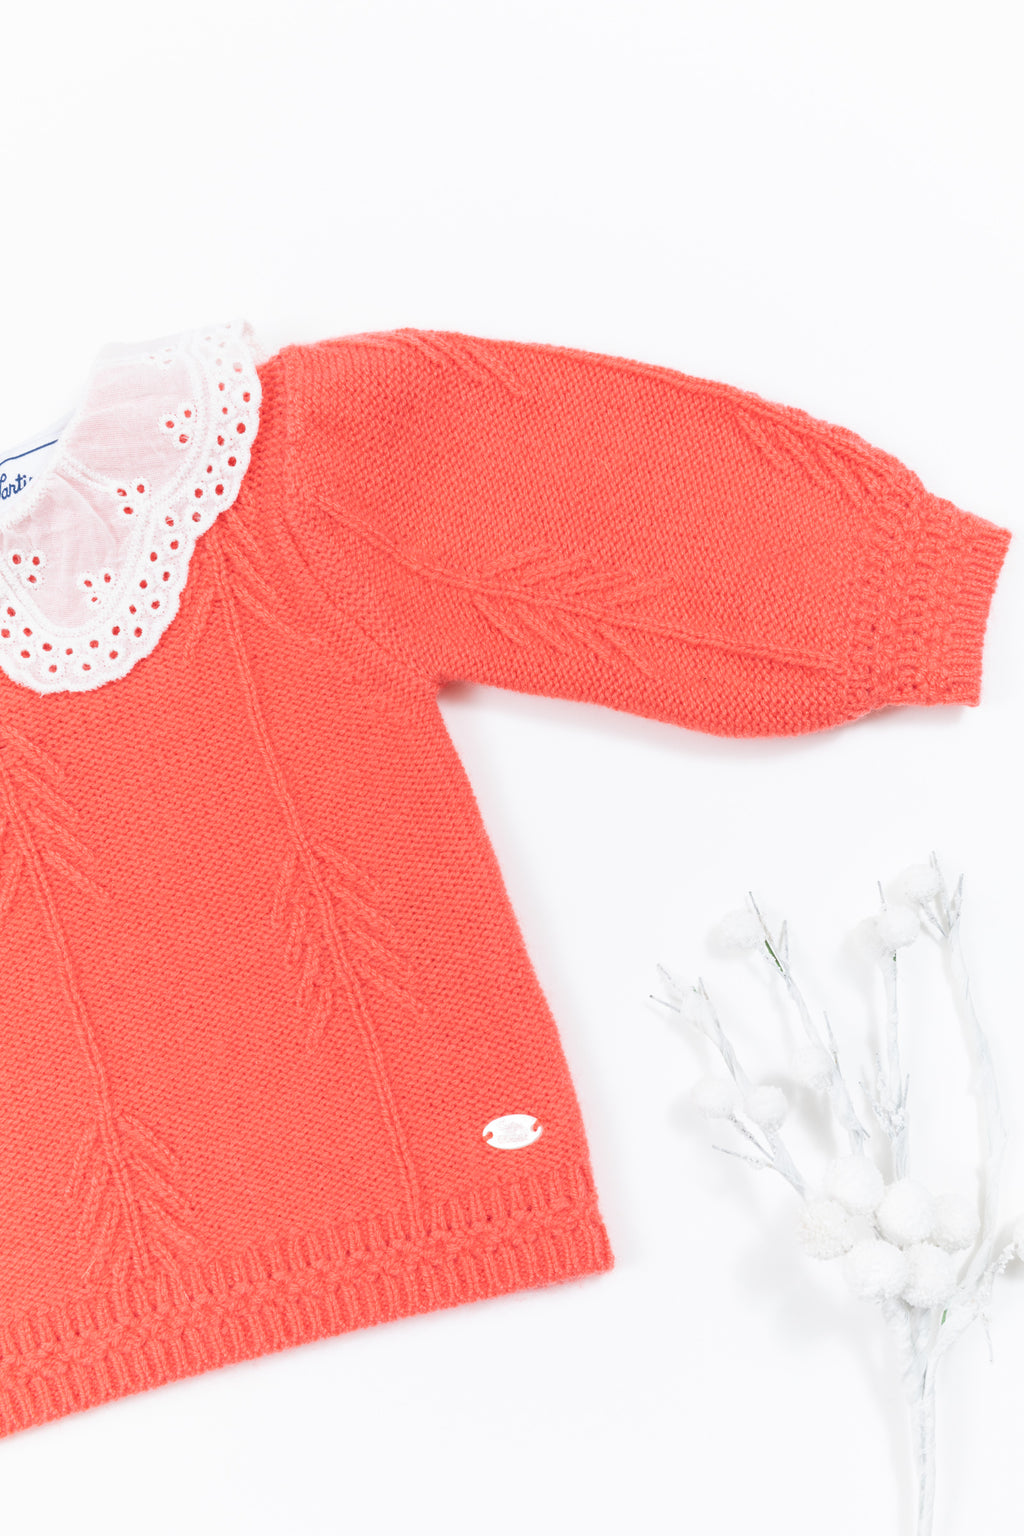 Sweater - Coral Collar Embrodery English